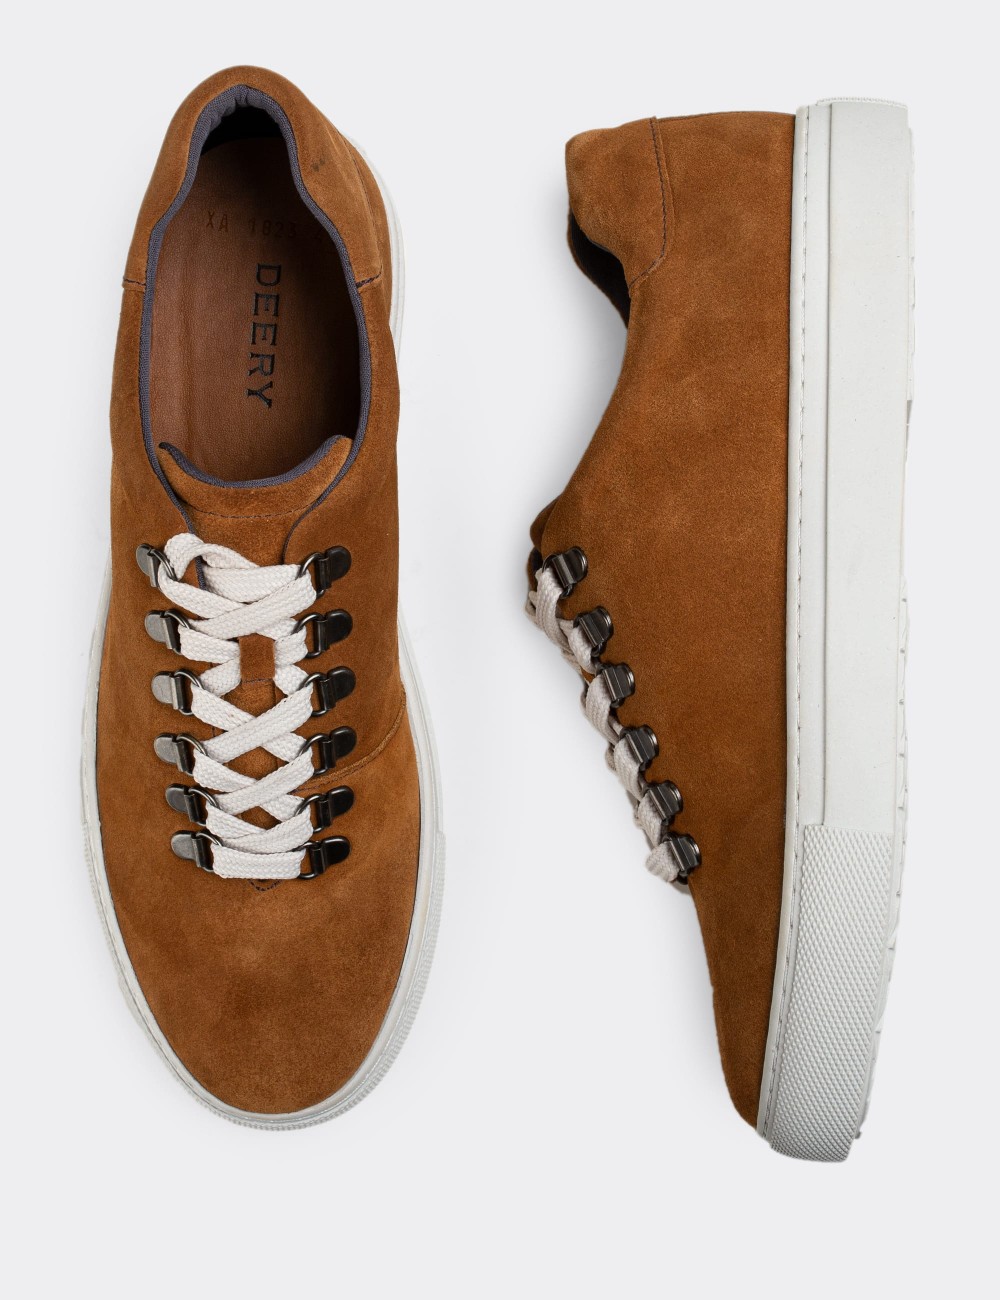 Tan Suede Leather Sneakers - 01835MTBAC01